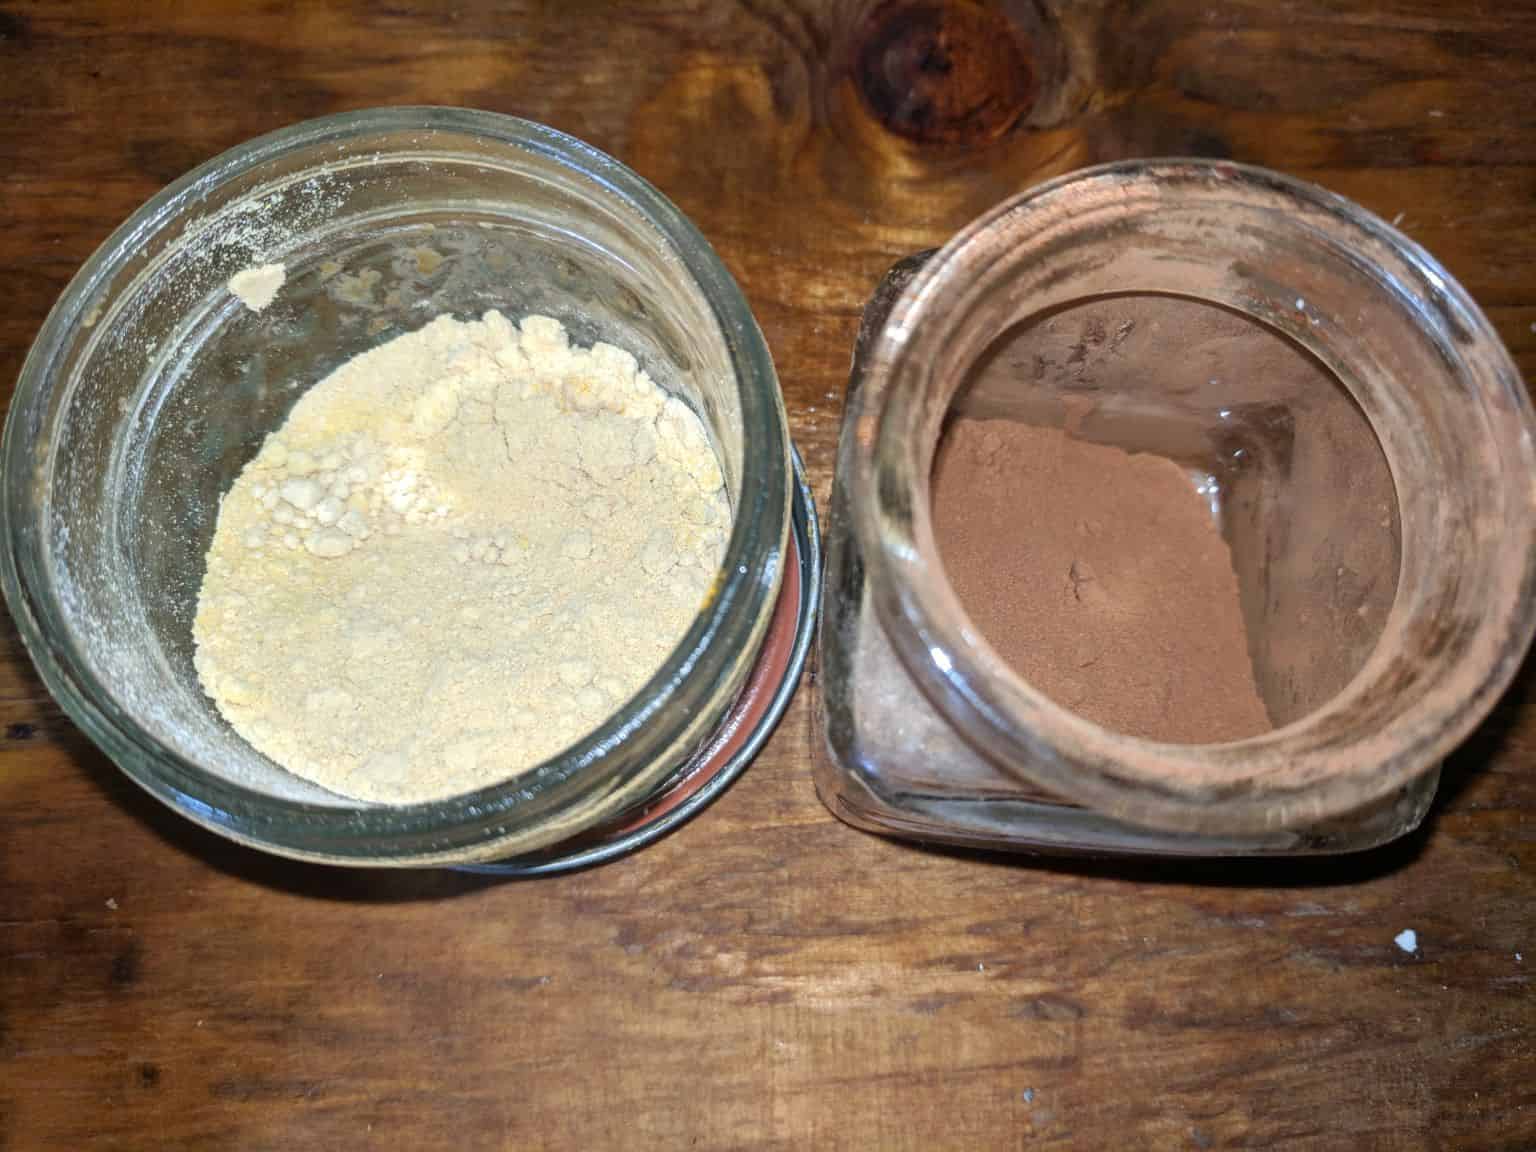 two shades of homemade eye shadow in glass jars